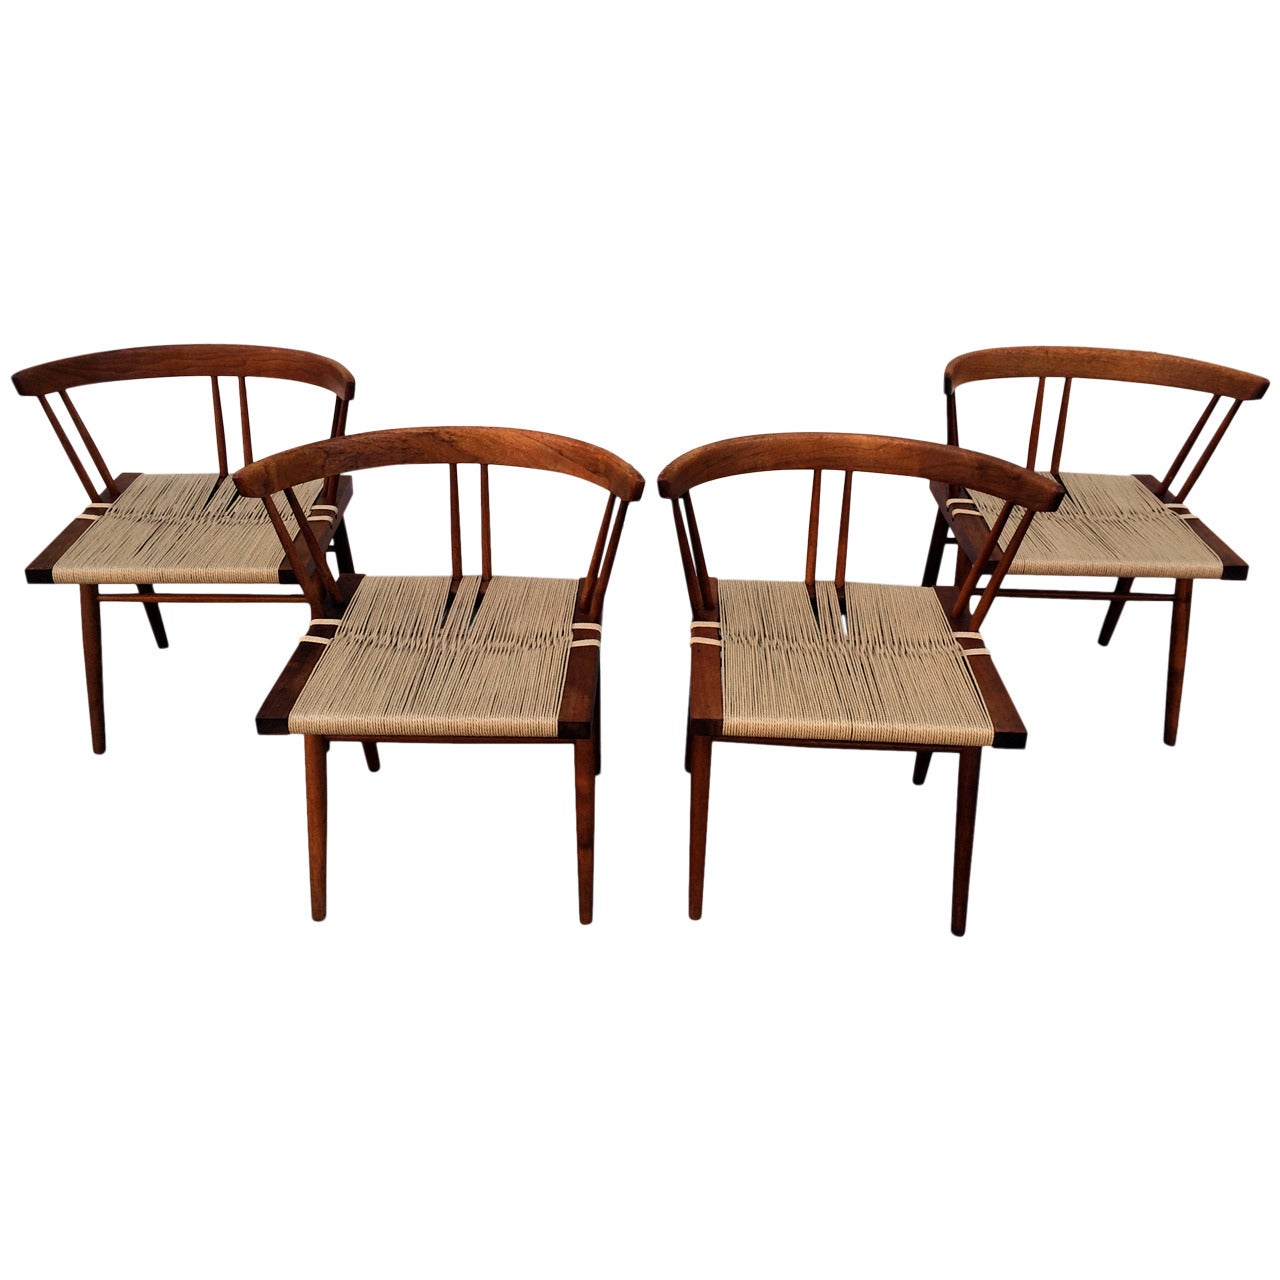 Set of Four Walnut and Woven Seat Chairs by George Nakashima